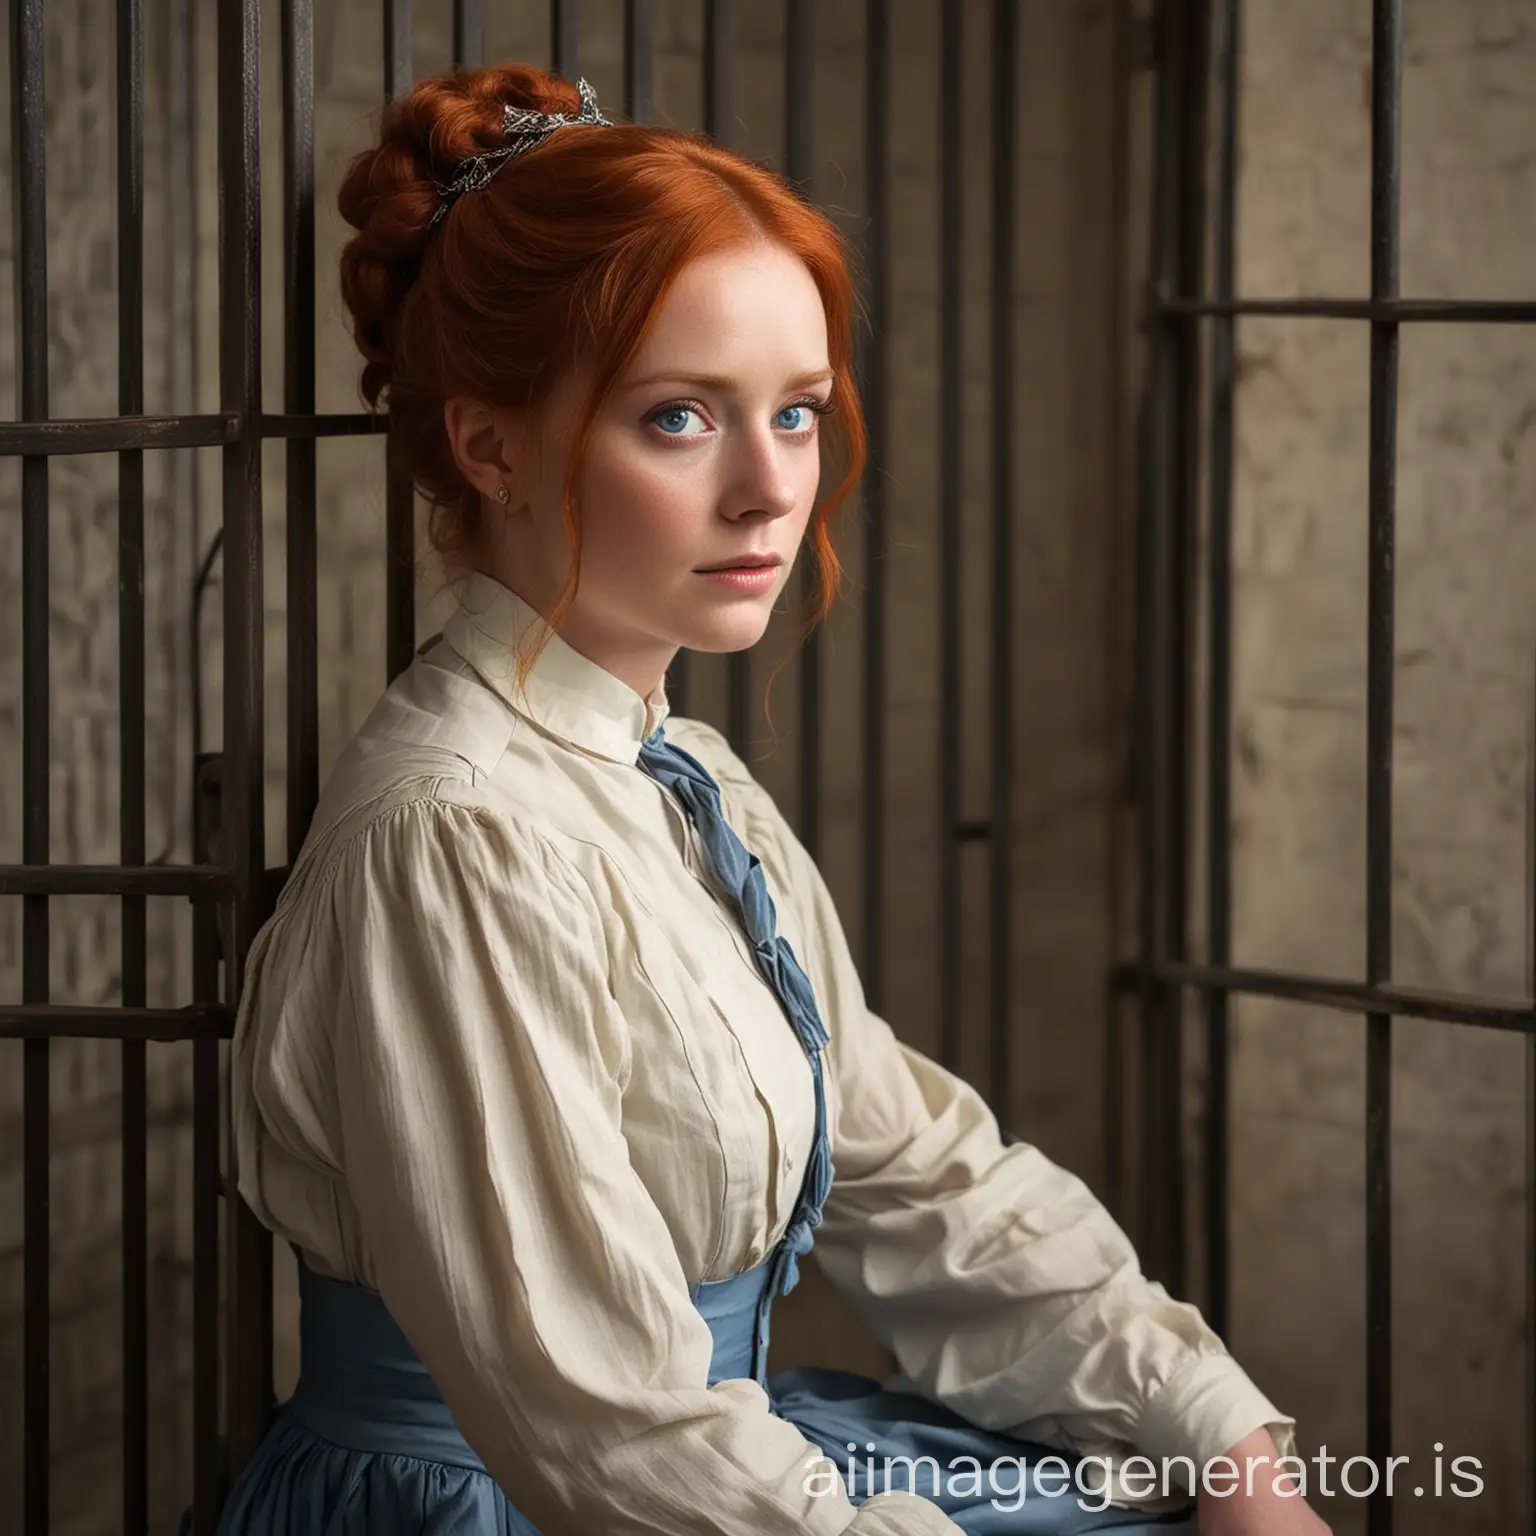 a beautiful young red haired blue eyed socialite turned suffragist is sitting in a jail cell. Across from her is a tall dark and handsome man with intense blue eyes. It is the mid 1800s.